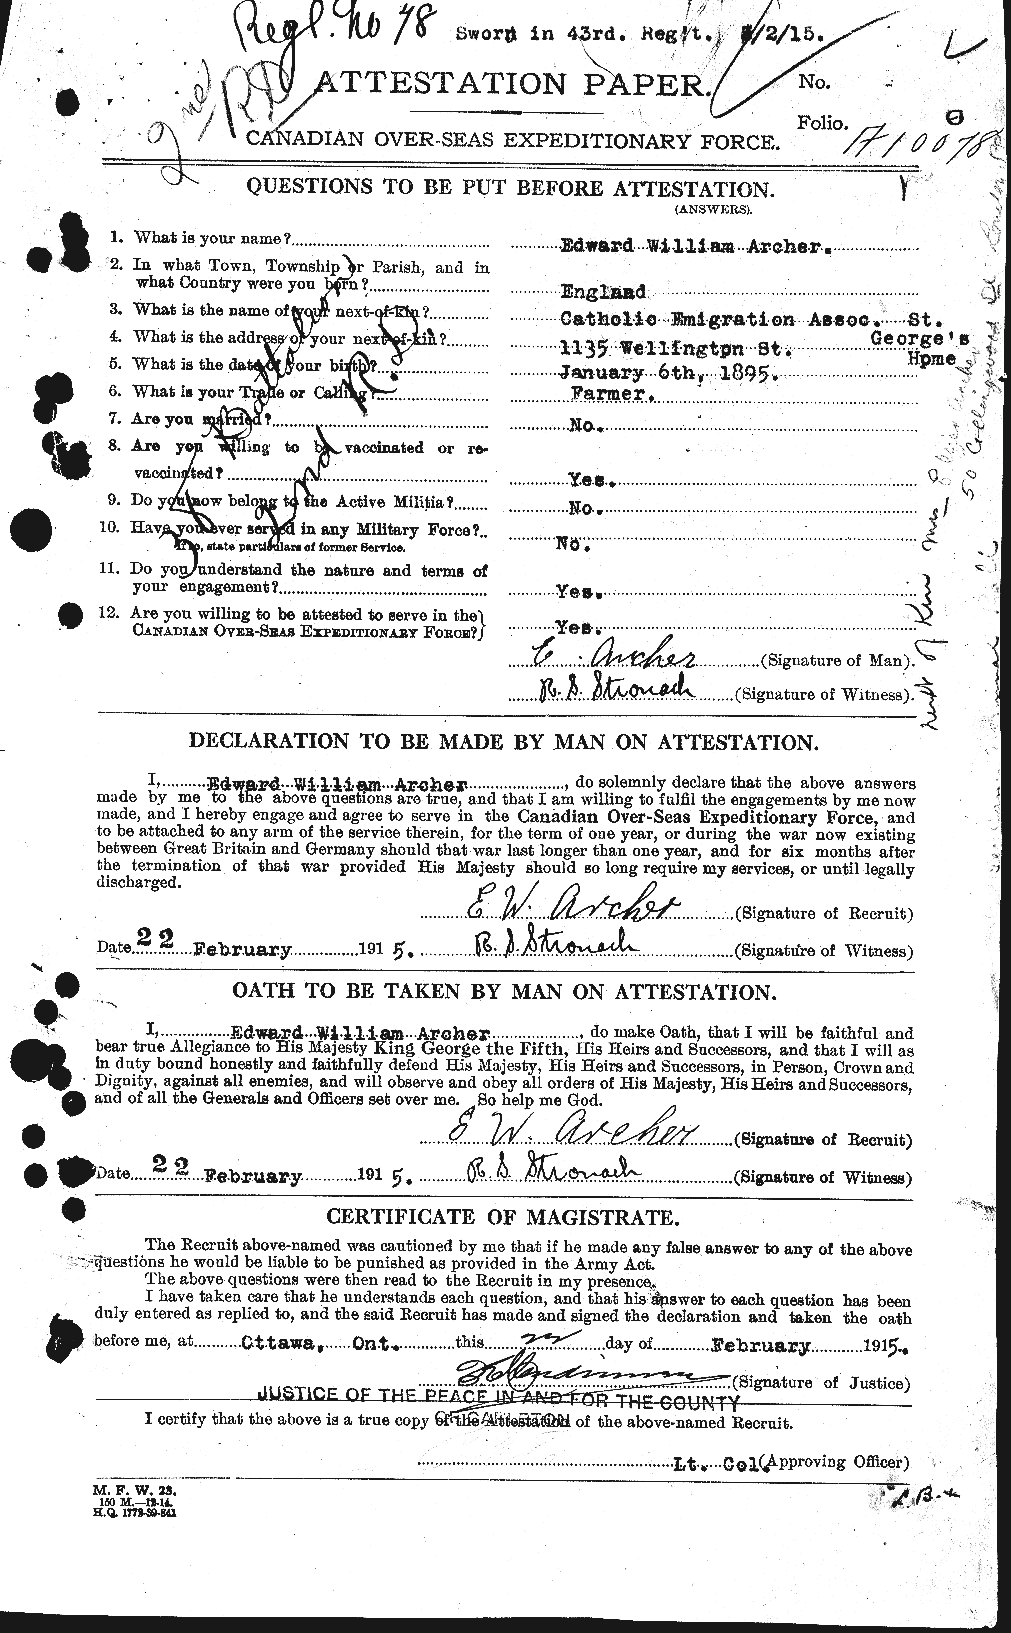 Personnel Records of the First World War - CEF 211764a